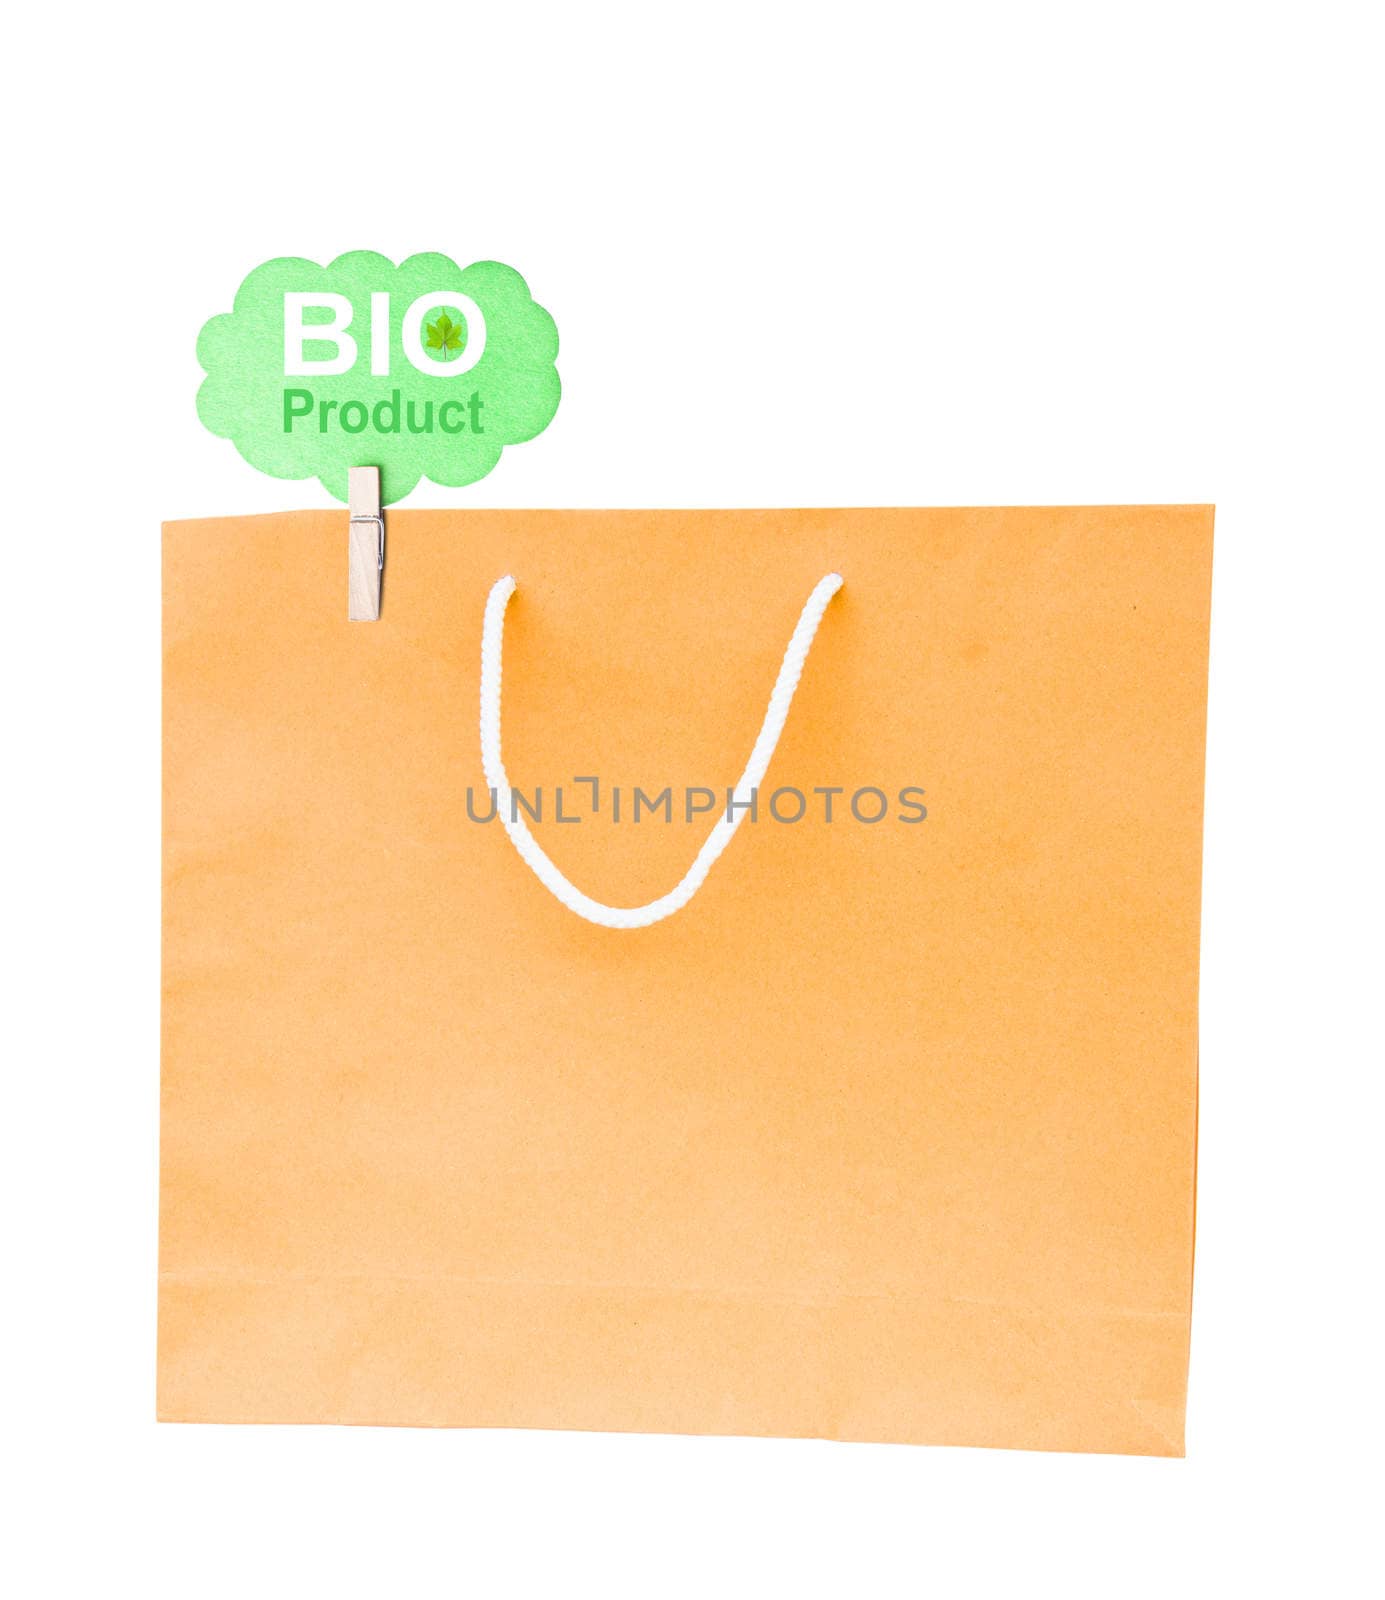 Blank brown paper bag isolated on white background by Gamjai